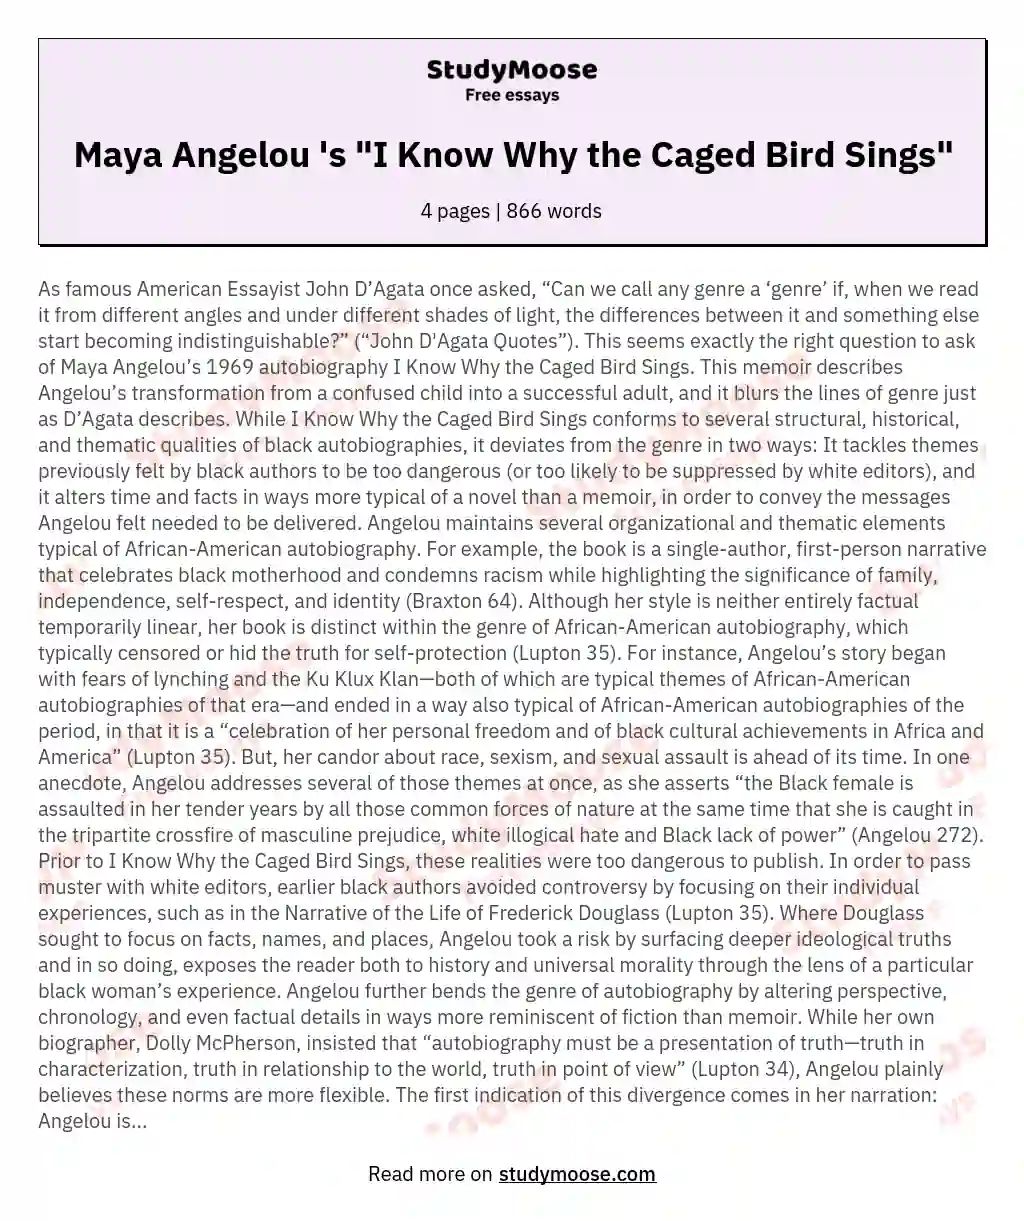 Maya Angelou 's "I Know Why the Caged Bird Sings" essay